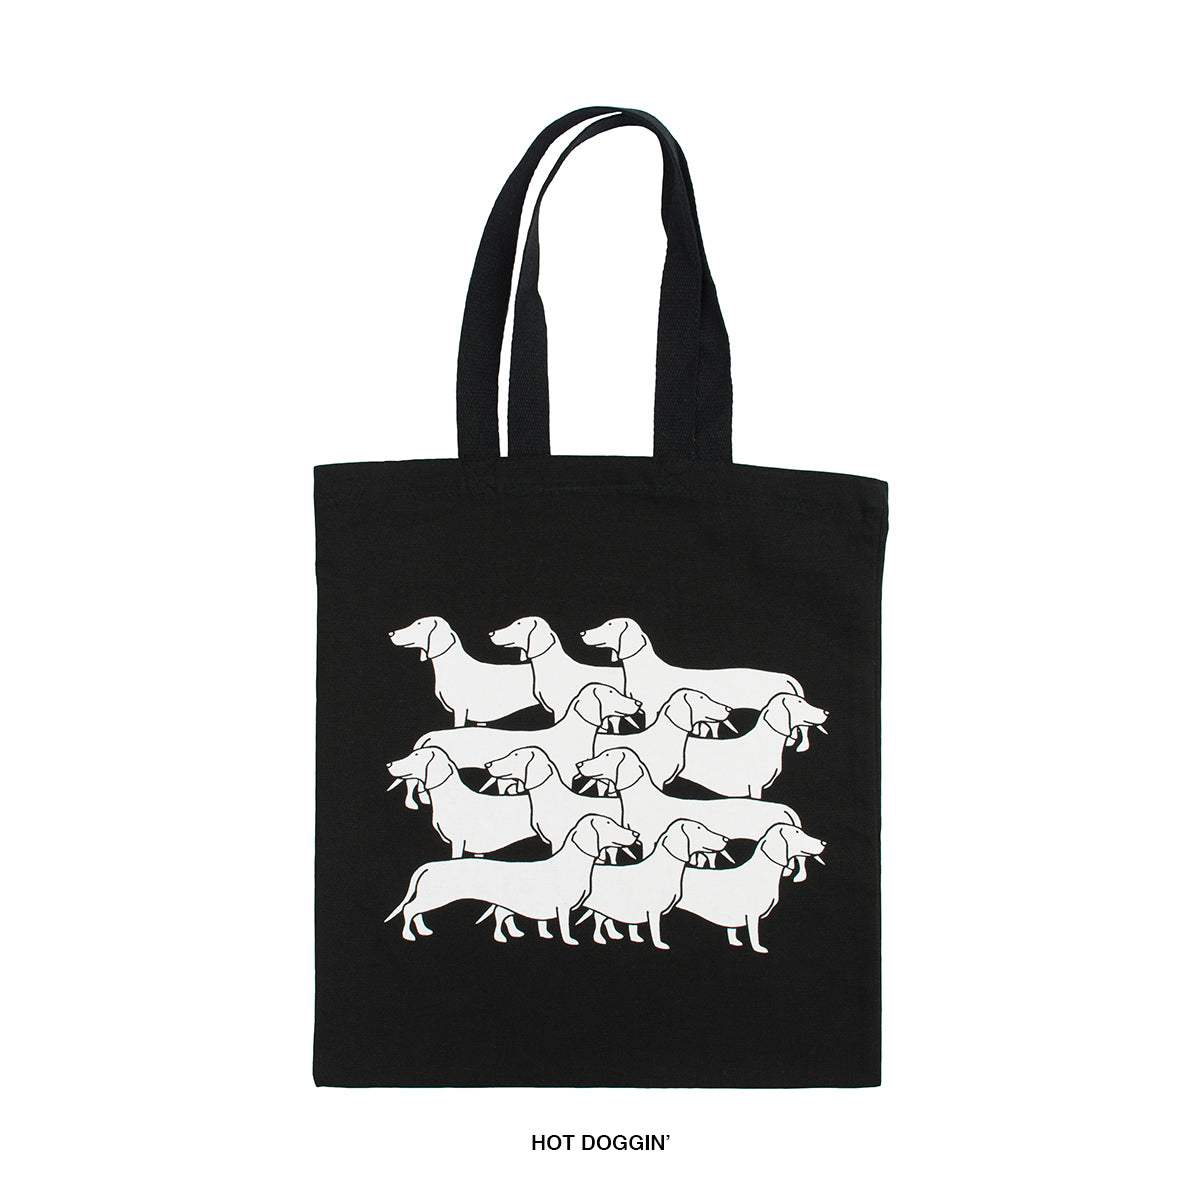 14 x 15" 100% cotton black tote with 12 dachshund illustrations in a linear 3x3 grid pattern in white